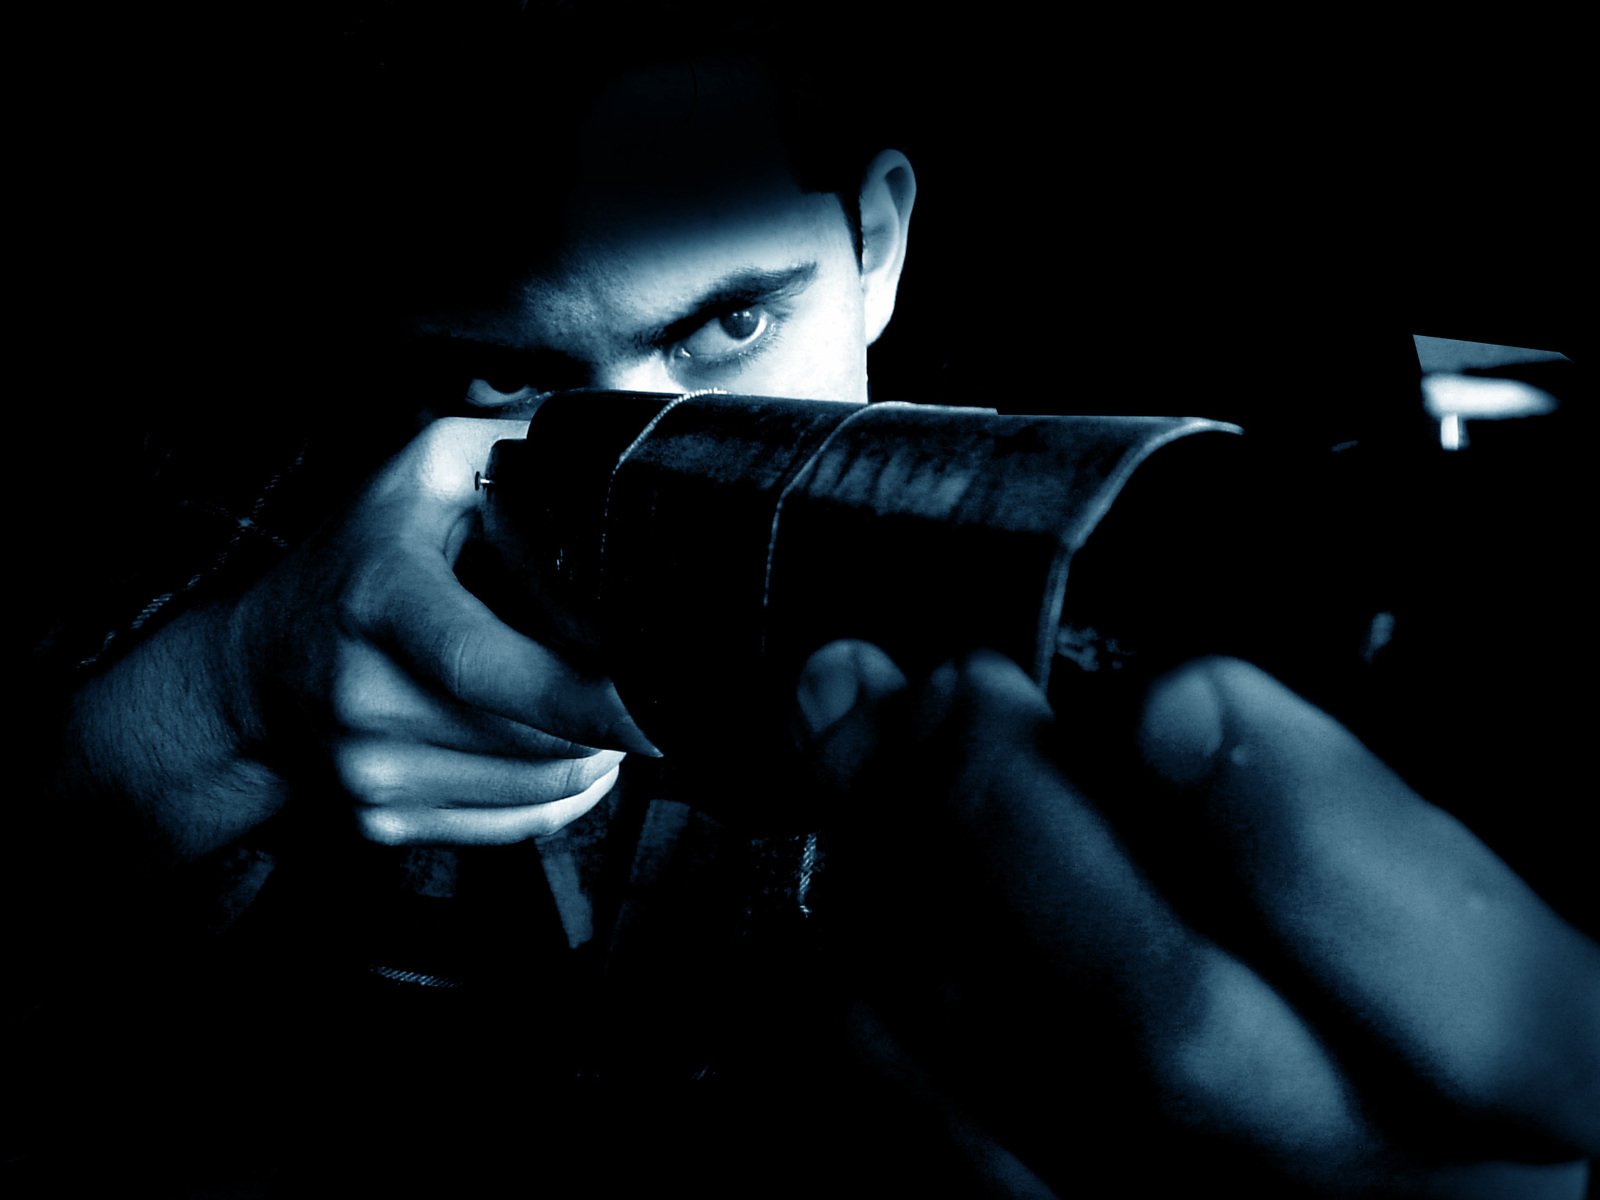 a person looking through the telescope with one hand and holding soing else